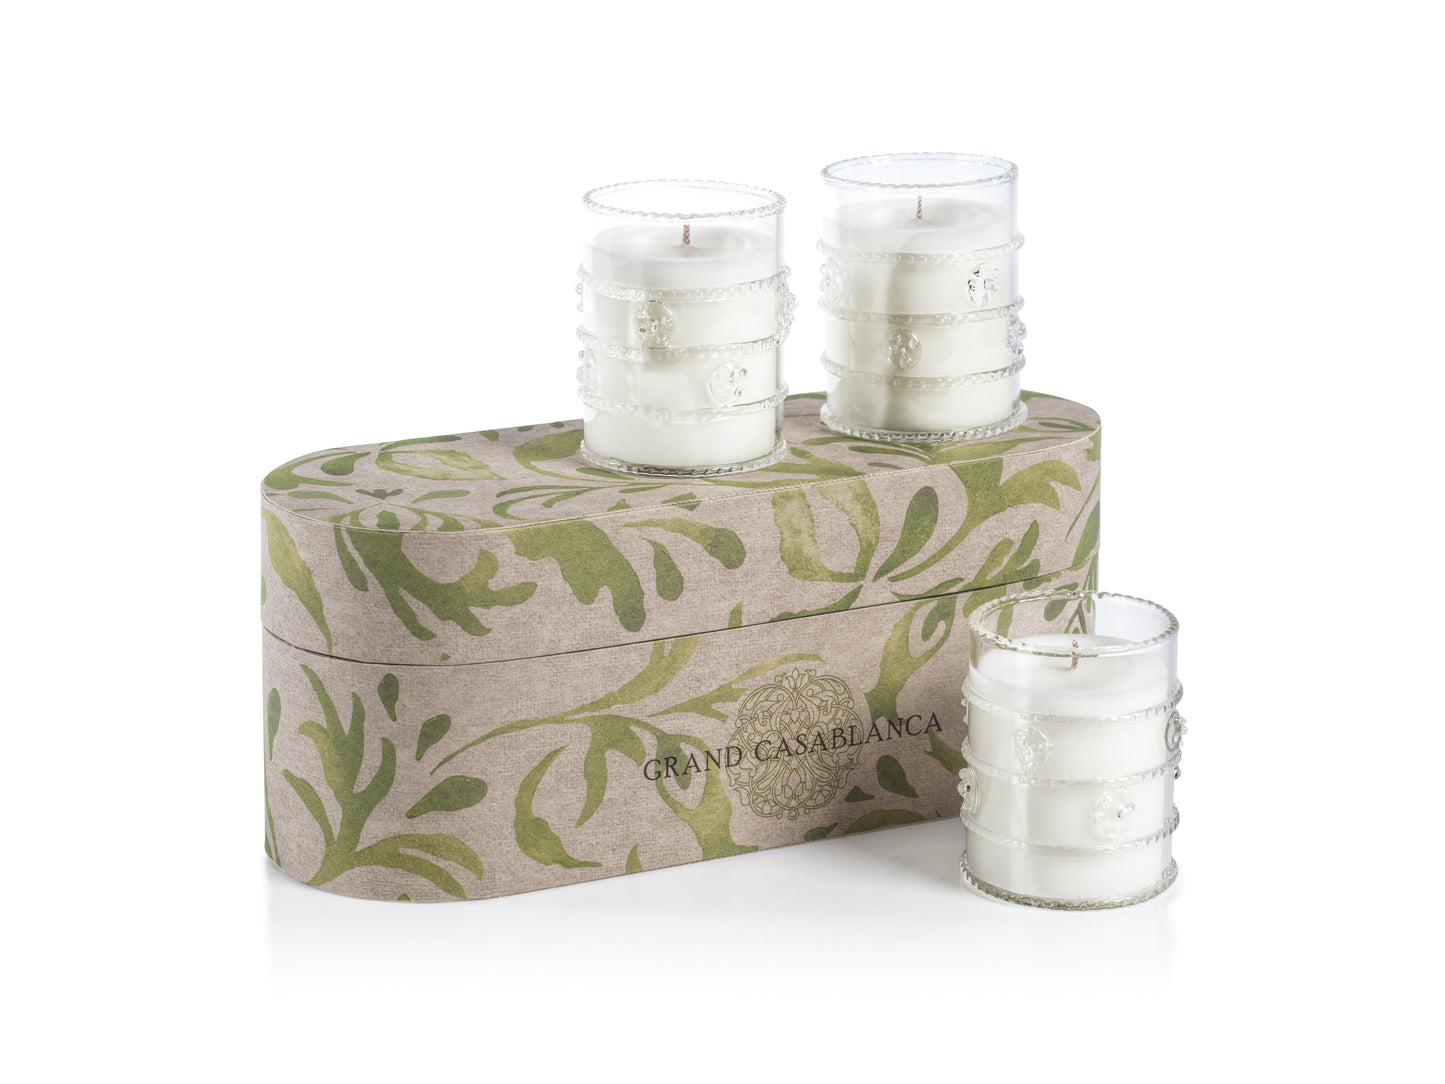 WATER LOTUS Zodax Grand Casablanca Scented Candle Trio - Gift Boxed